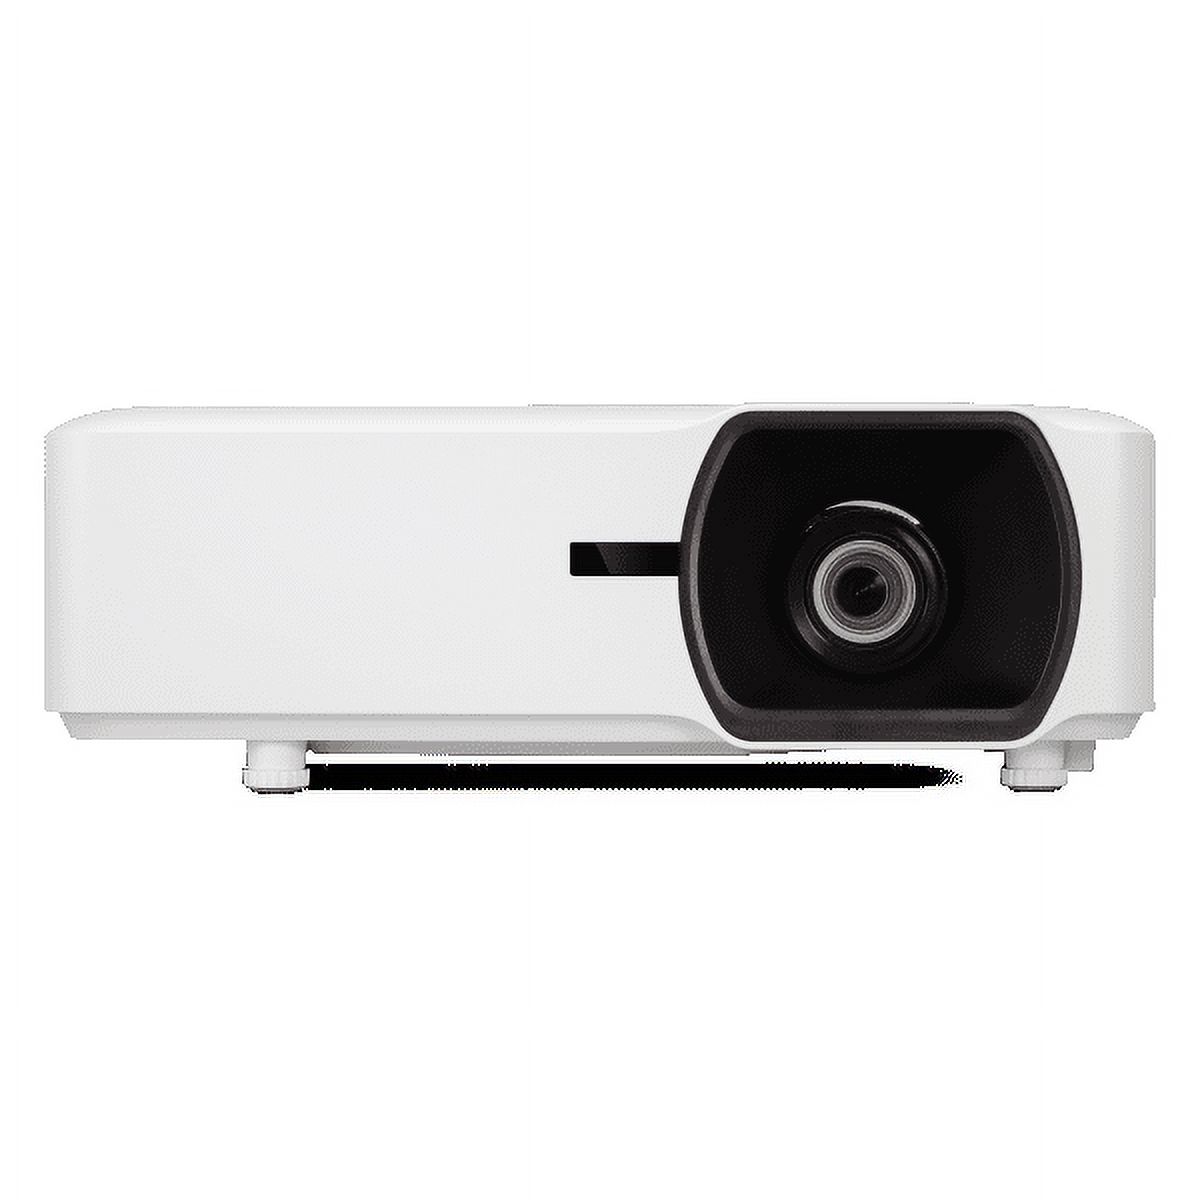 ViewSonic LS750WU 5000 Lumens WUXGA Networkable Laser Projector with 1.3x Optical Zoom Vertical Horizontal Keystone and Lens Shift for Large Venues - image 1 of 6